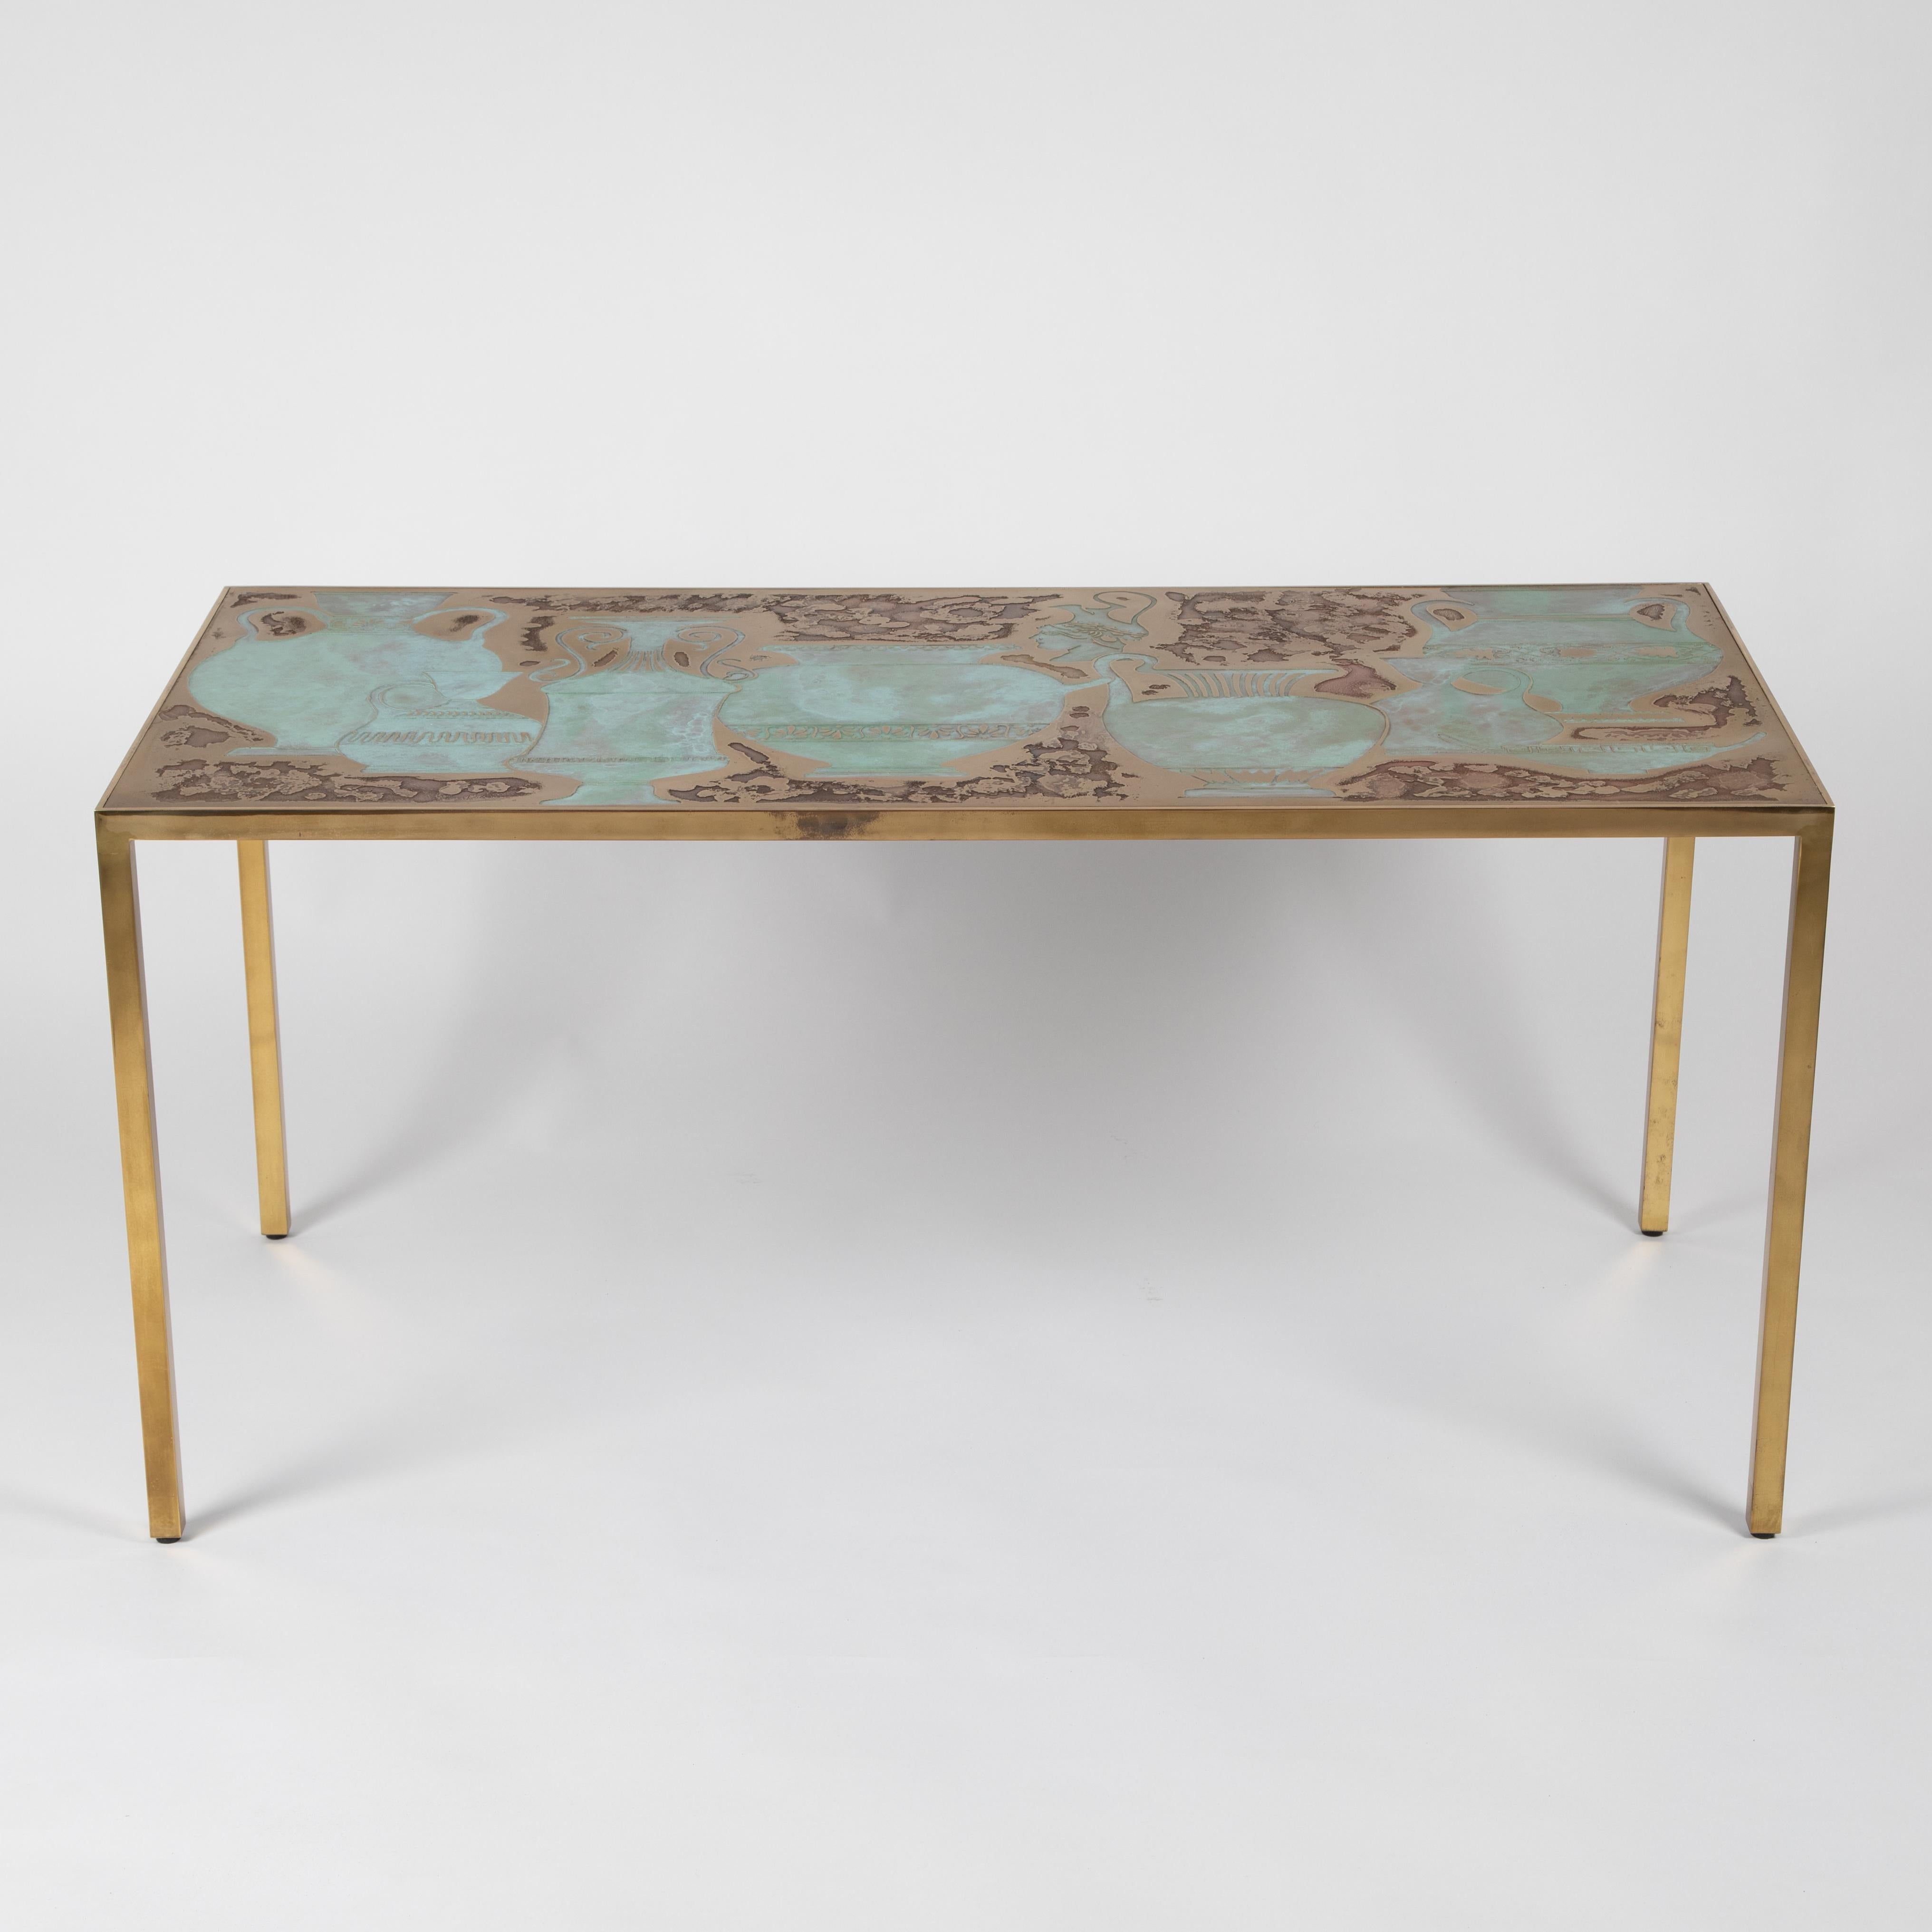 This stunning and seldom-seen Harvey Probber (American, 1922–2003) sofa or console table features an acid-etched and patinated bronze top with a minimalist, polished solid-brass frame. The top depicts a variety of artfully executed Greek pottery